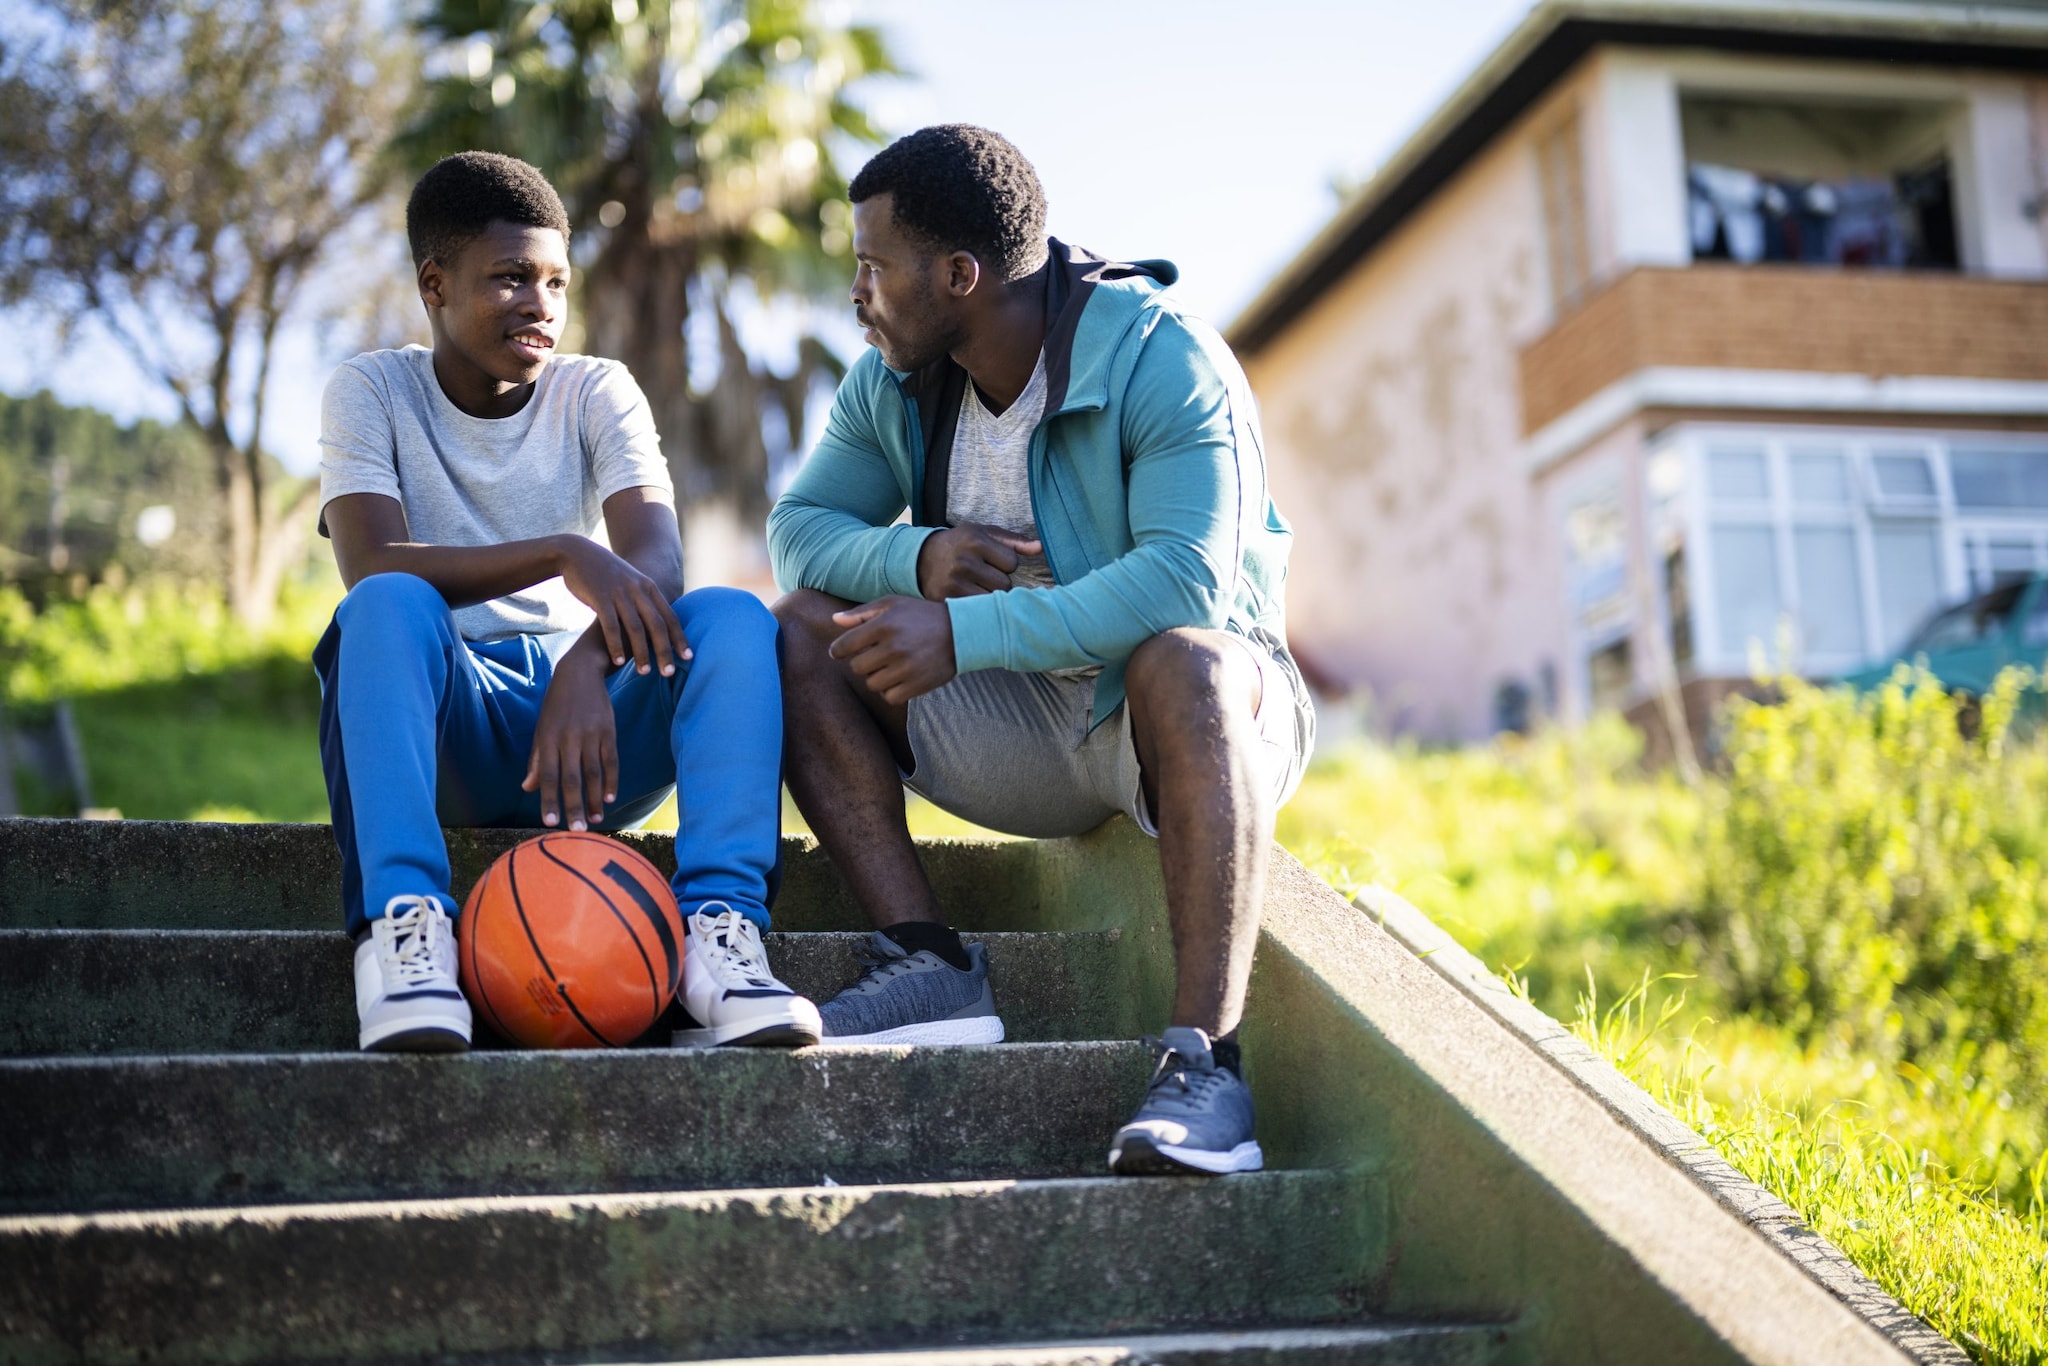 A man and a child are sitting and talking on steps outside a housing area. A basketball lies at the feet of the young boy.